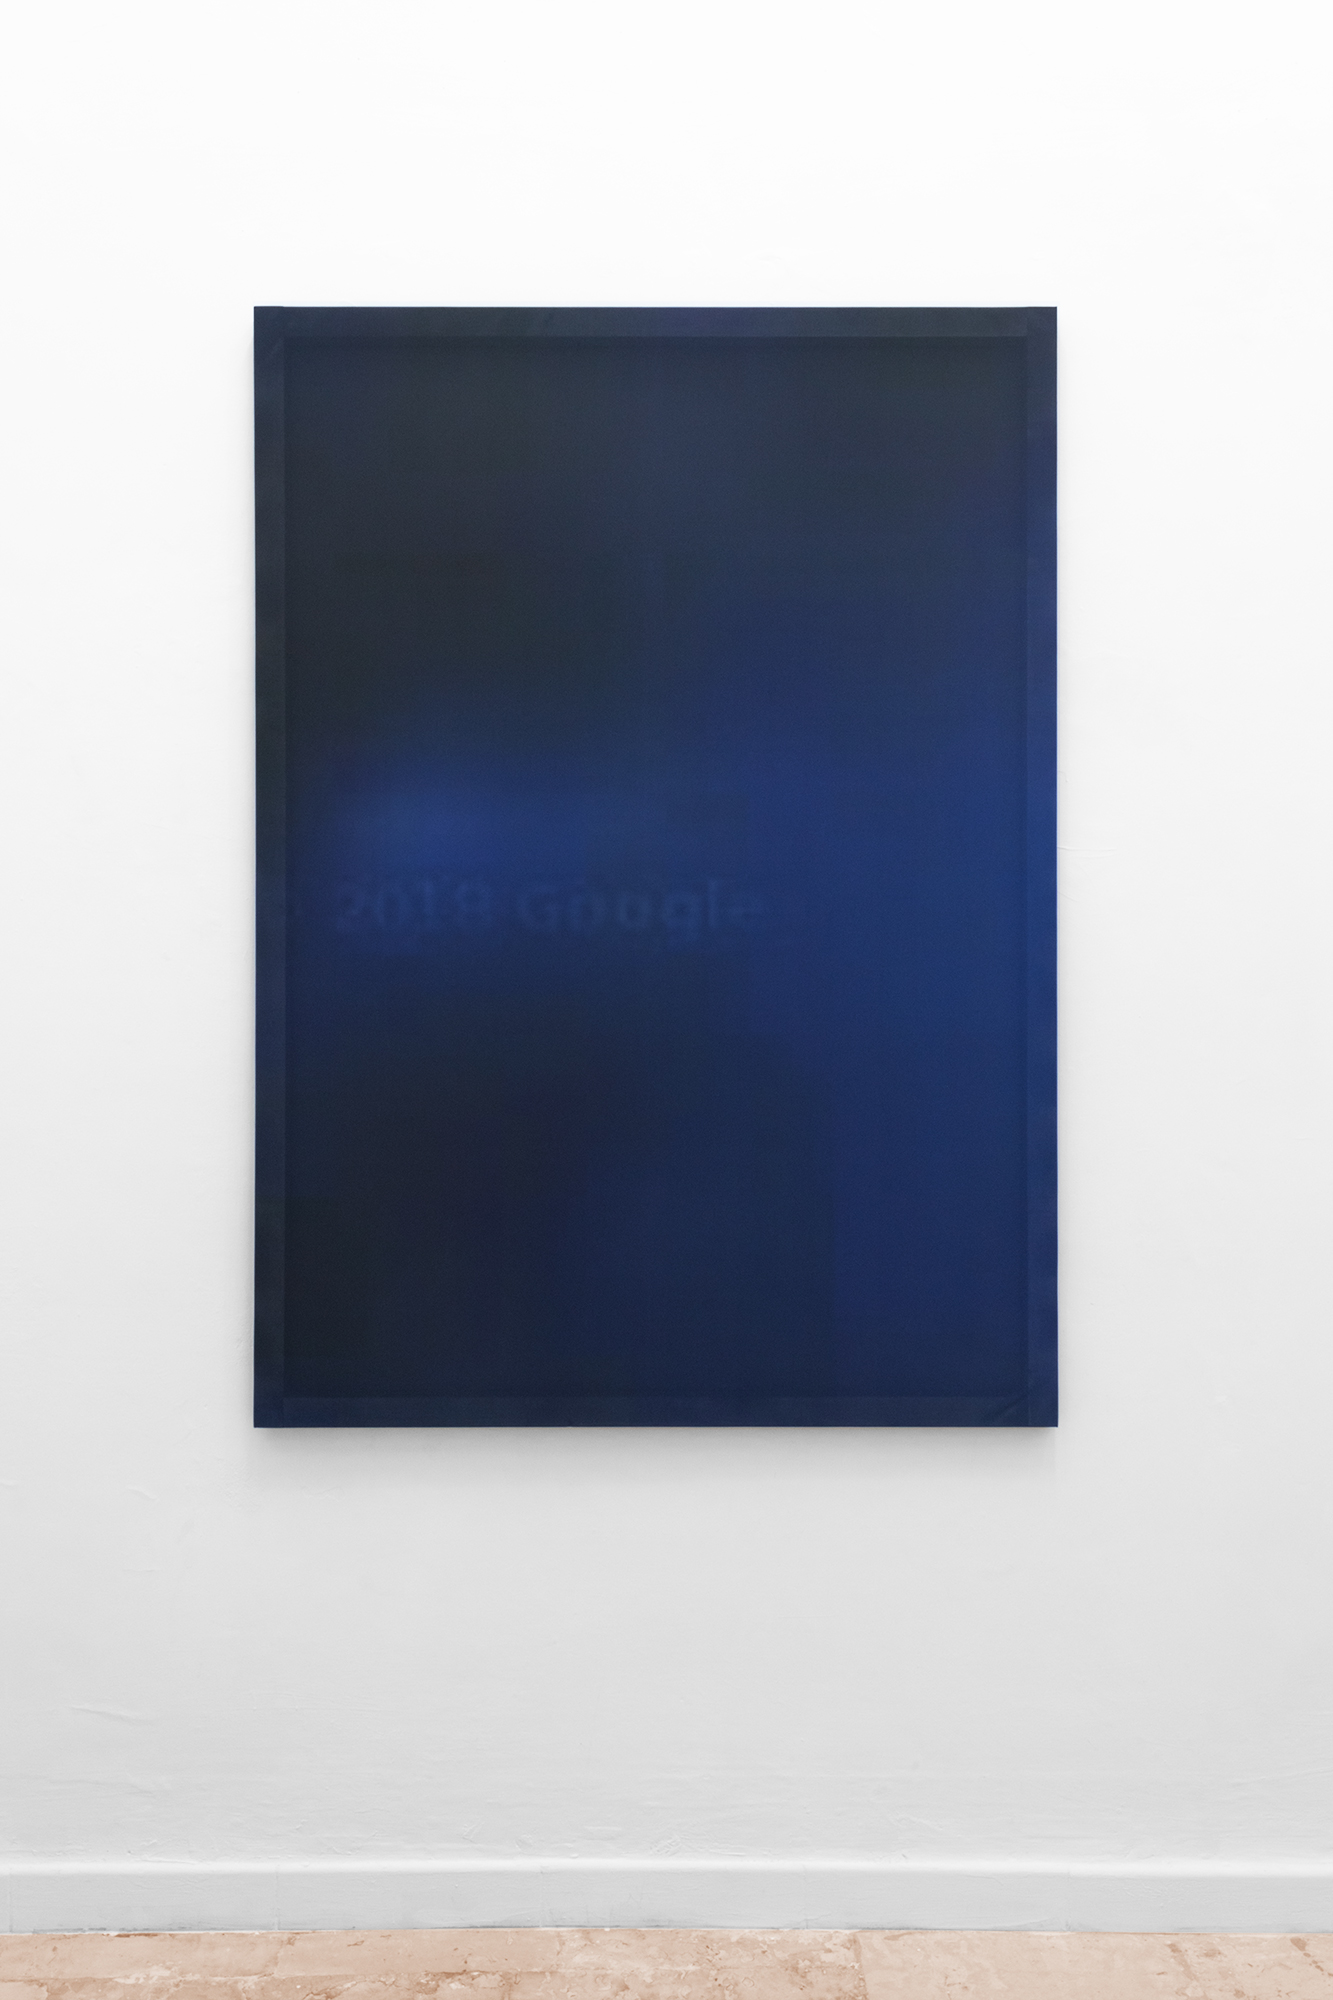 Maurizio Viceré, kh-(40) Black and blue, Calendered sublimation ink print on windproof nautical fabric, stretcher. 140 X 100 cm. 2018